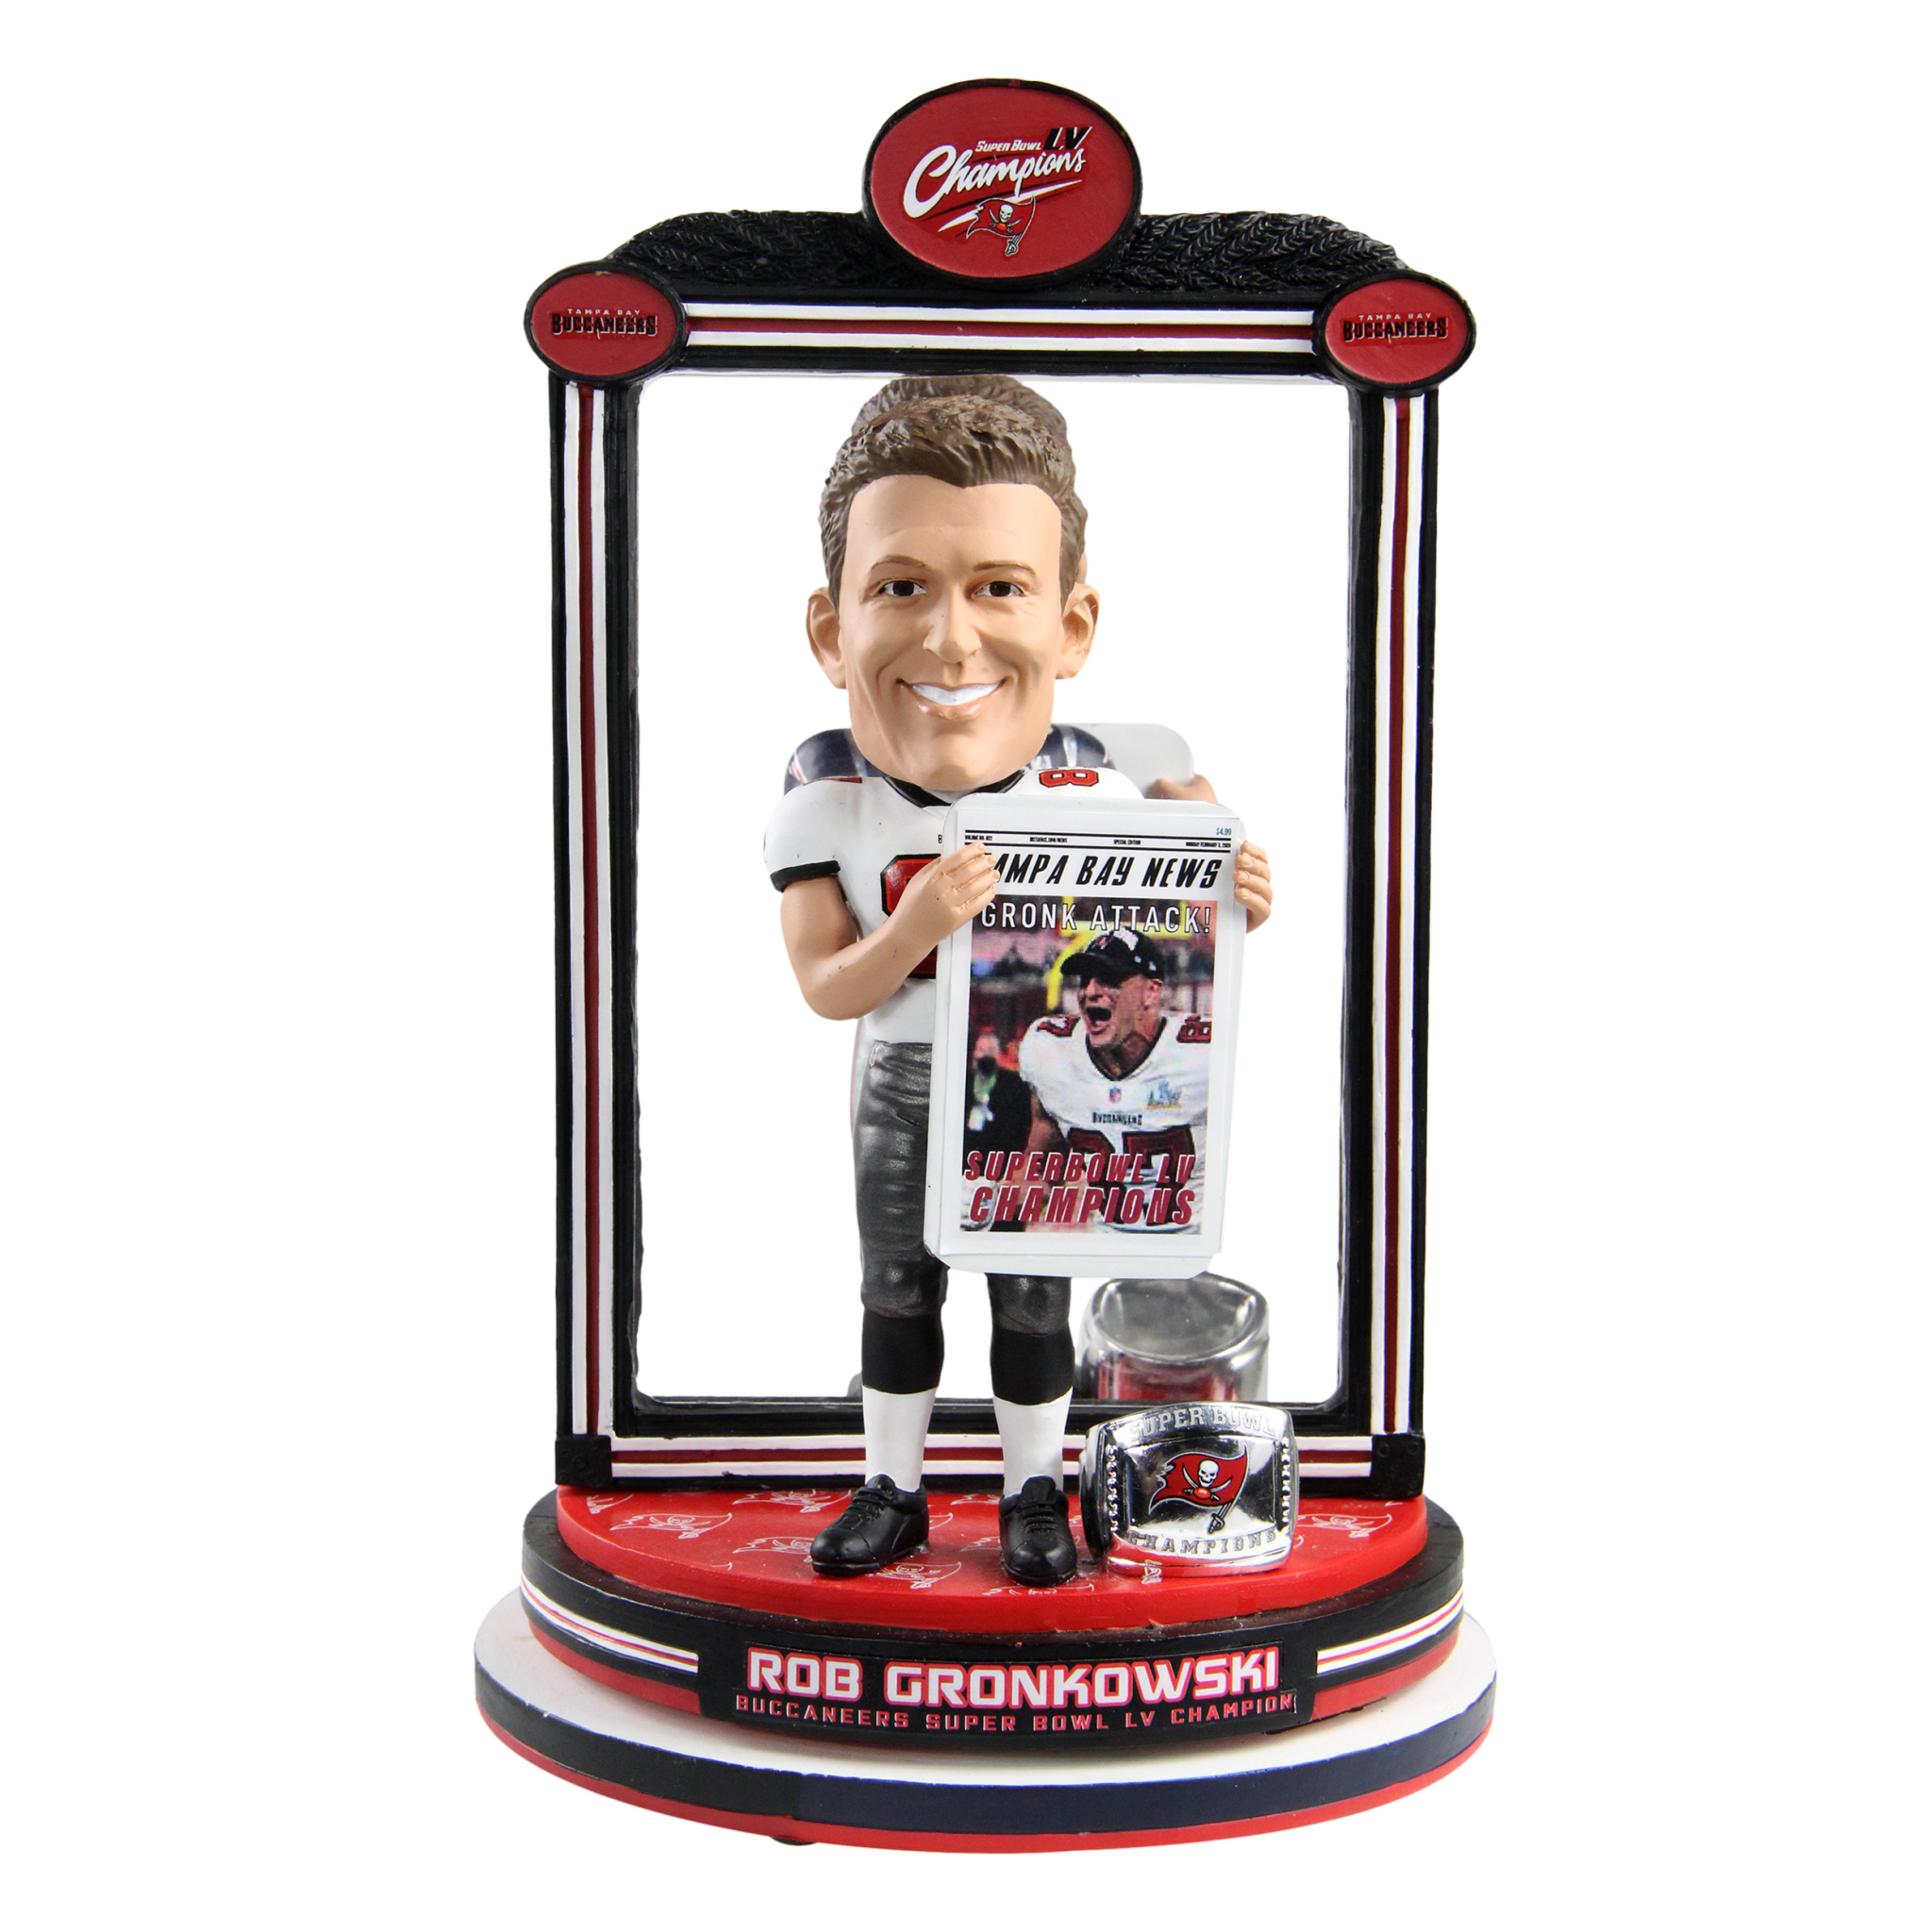 Rob Gronkowski 2021 Super Bowl Champions RING BASE Limited Edition Bobblehead Tampa Bay Buccaneers 